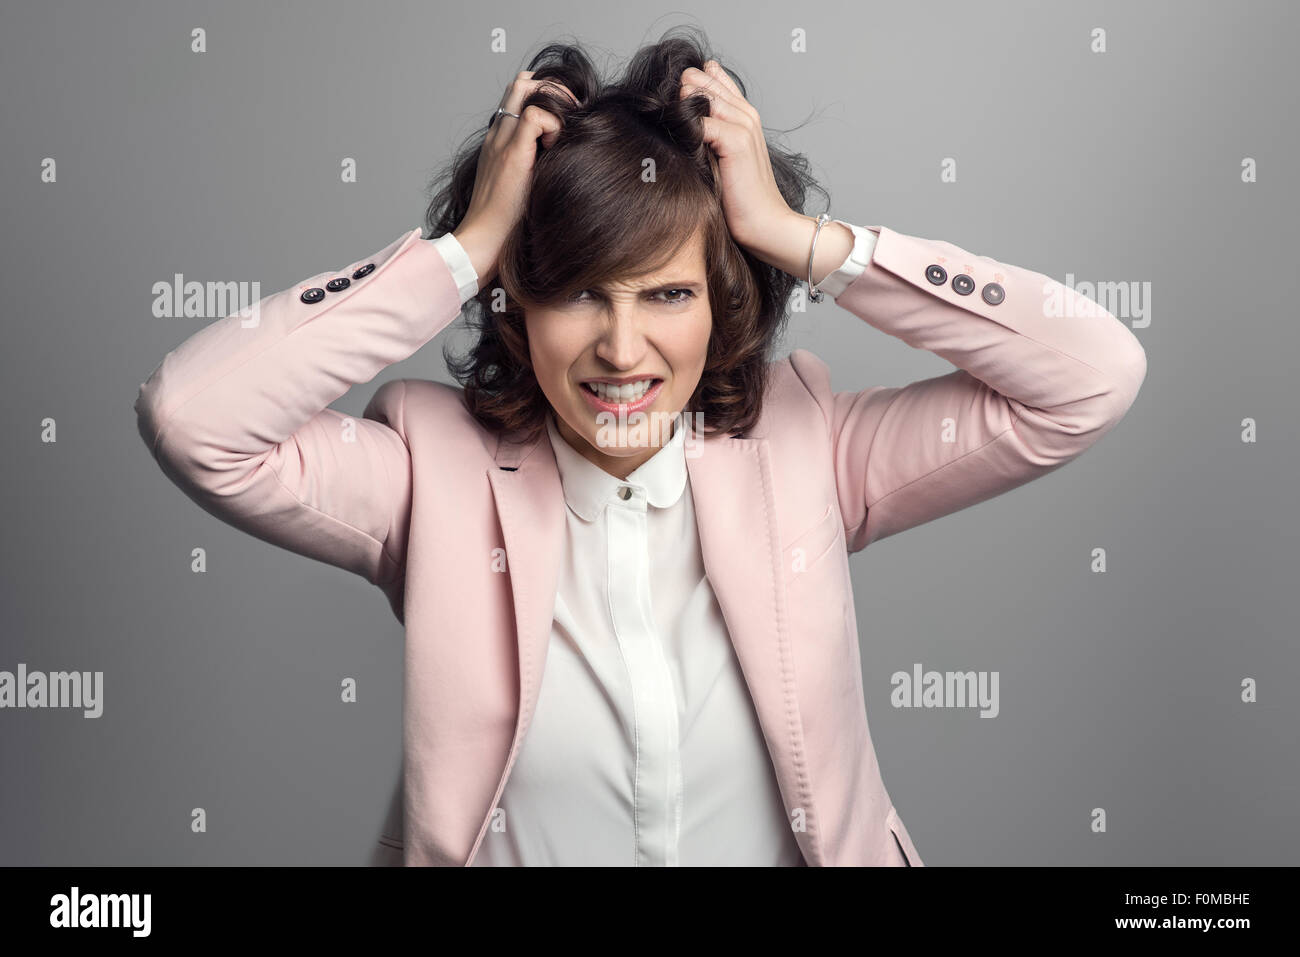 Attractive stylish young woman in a pink jacket tearing at her brown hair with her hands as she vents her frustration, over grey Stock Photo